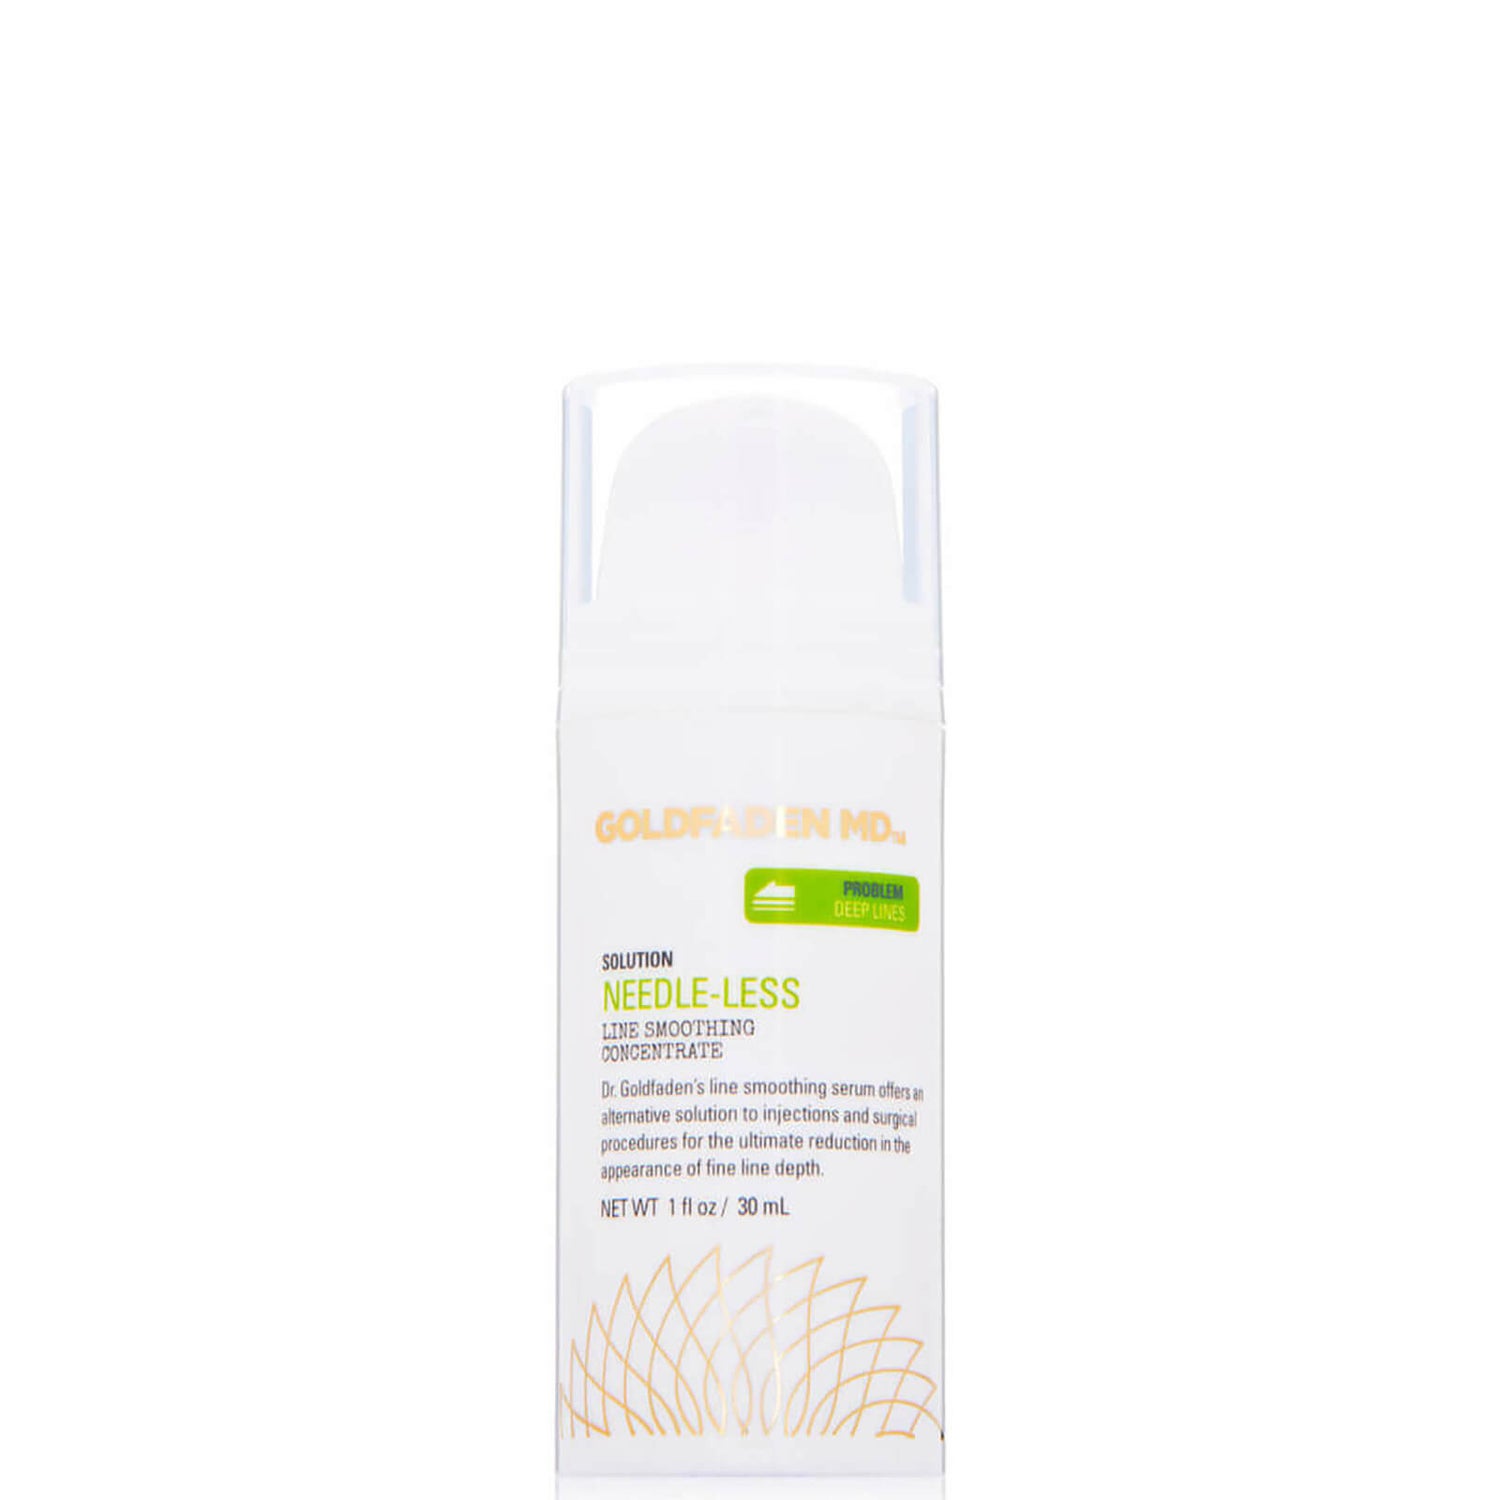 Goldfaden MD Needle-Less Line Smoothing Concentrate (1 oz.)